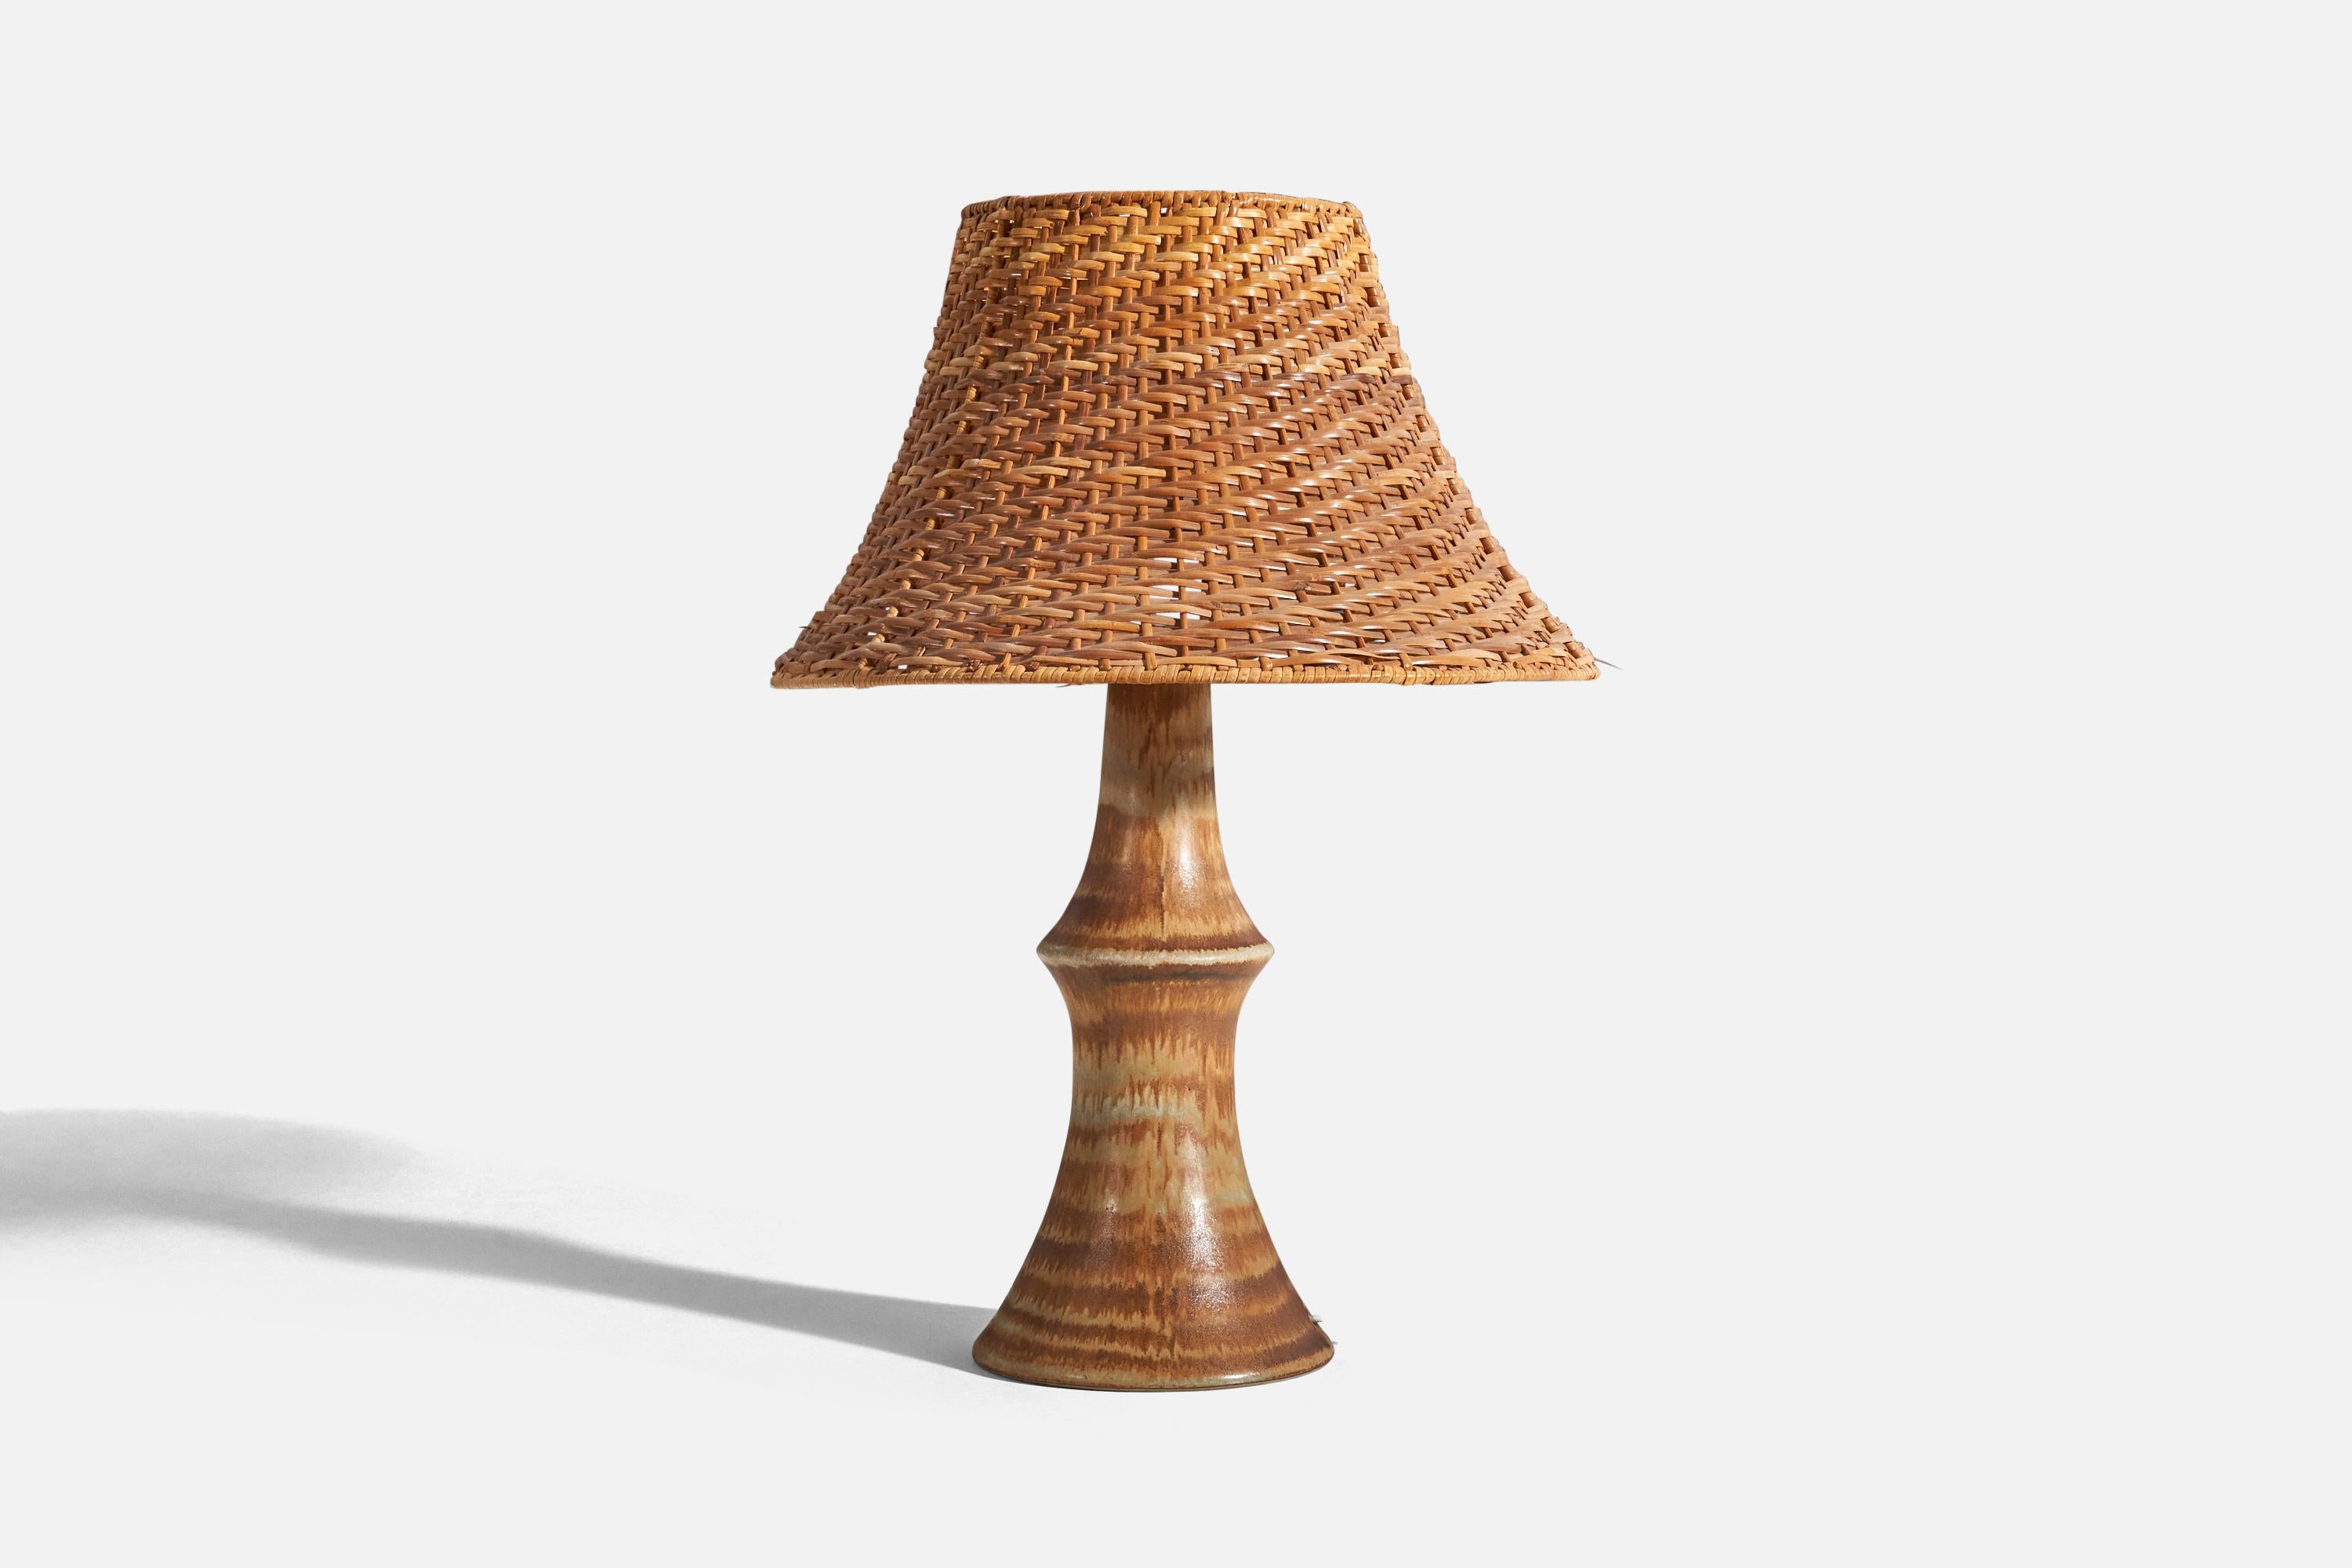 A brown-glazed stoneware table lamp designed by Bruno Karlsson and produced by Ego Stengods, Sweden, c. 1960s.

Sold with lampshade. 
Dimensions of lamp (inches) : 15.06 x 6.25 x 6.25 (height x width x depth)
Dimensions of shade (inches) : 6.75